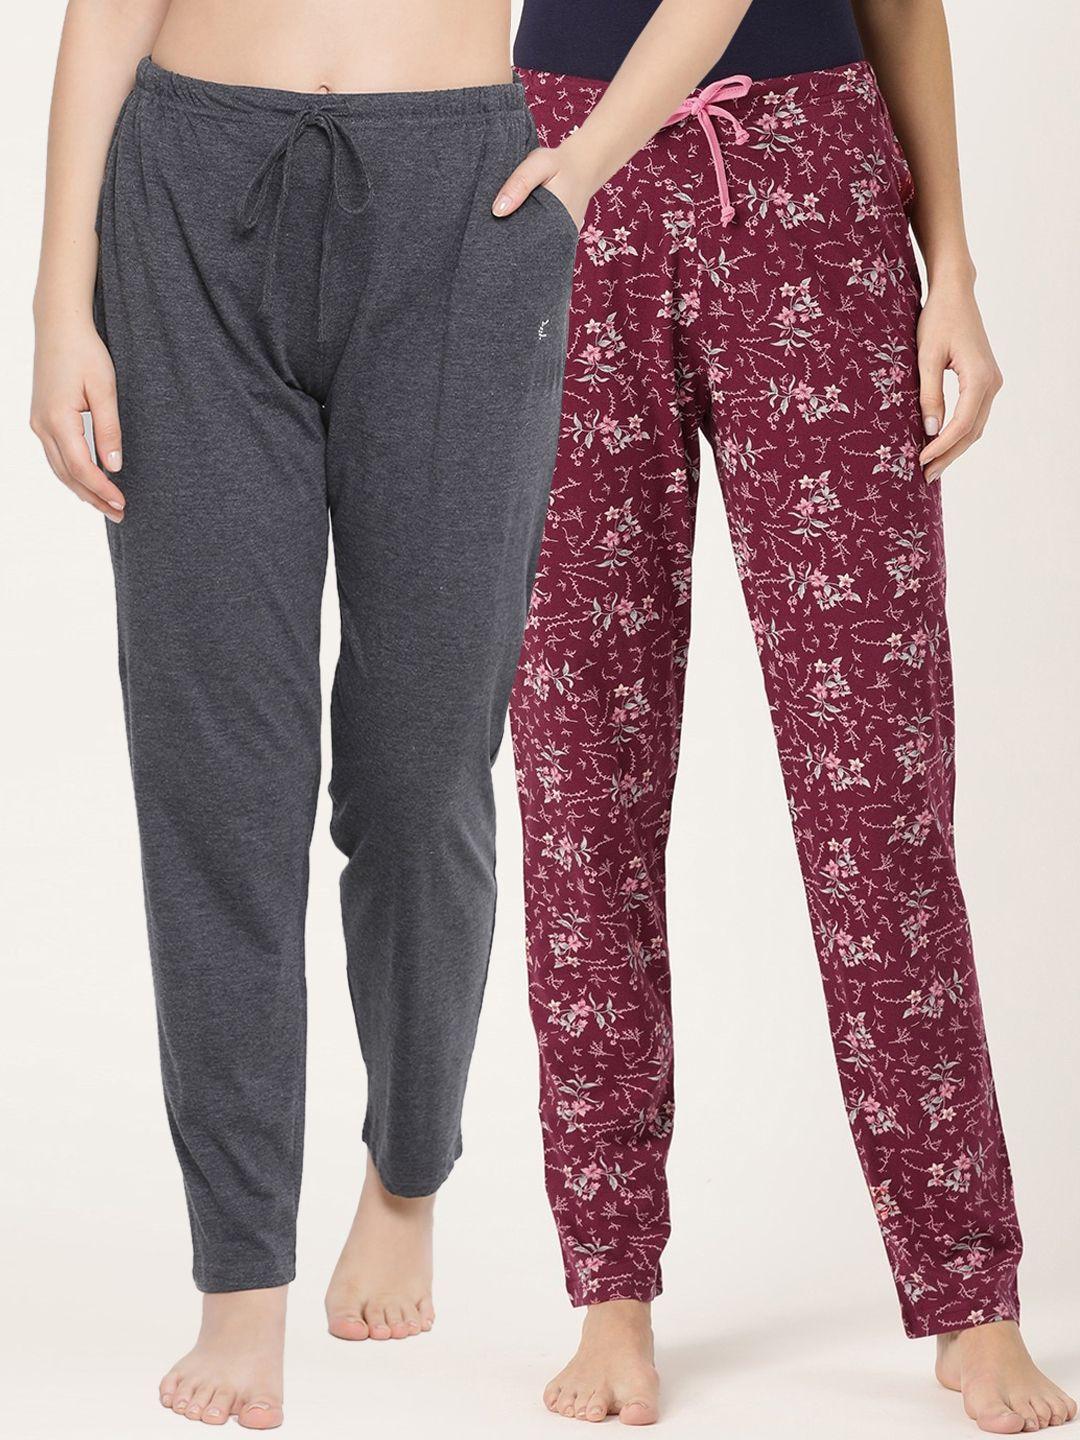 kanvin women pack of 2 solid lounge pants